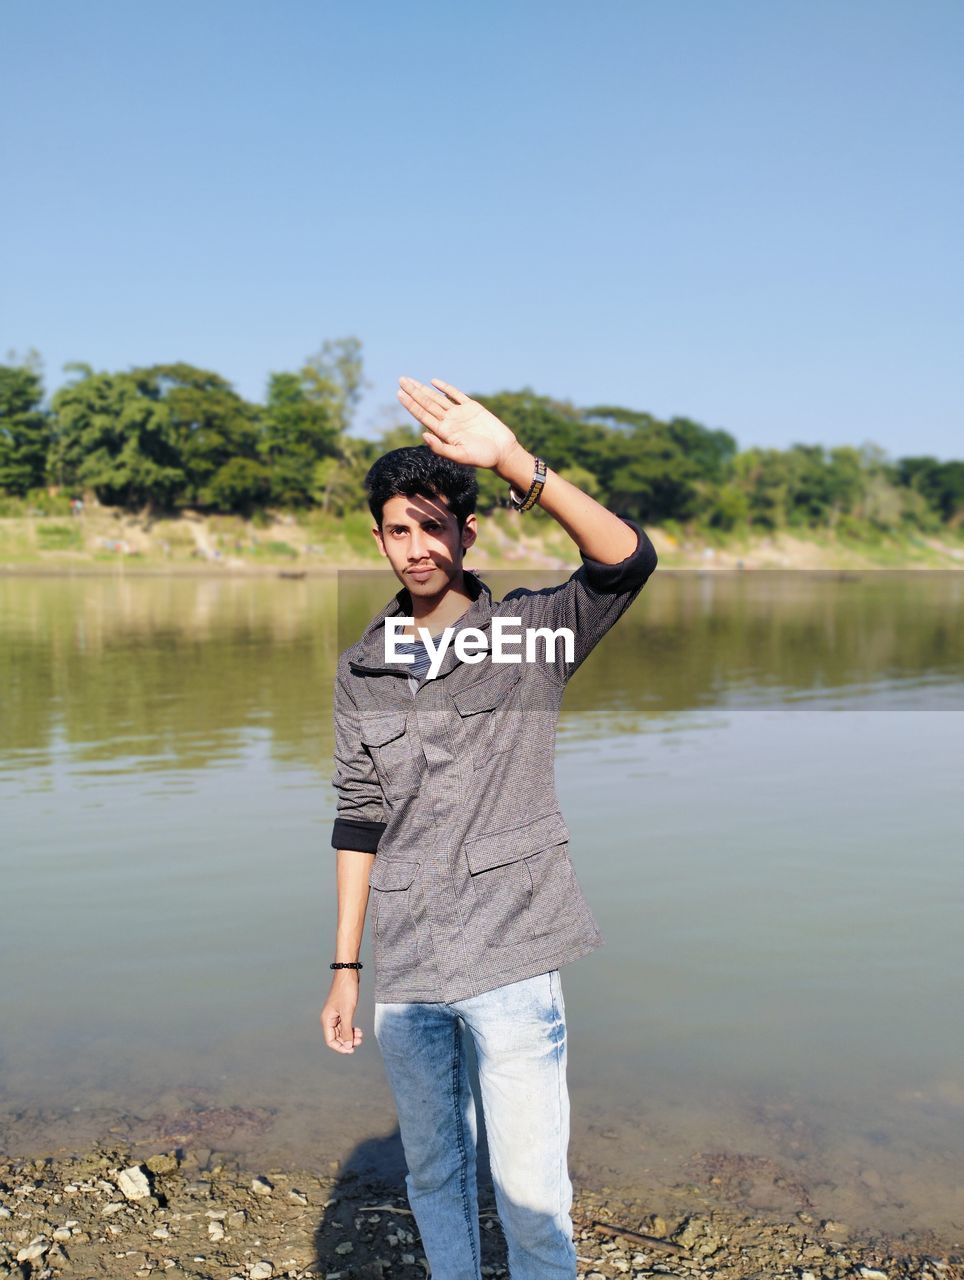 water, one person, lake, nature, casual clothing, adult, standing, leisure activity, day, full length, sky, young adult, smiling, copy space, hat, front view, lifestyles, outdoors, emotion, clothing, men, portrait, happiness, clear sky, reflection, plant, tree, looking, looking at camera, environment, beauty in nature, tranquility, beach, holiday, activity, sunny, vacation, sunlight, trip, holding, lakeshore, women